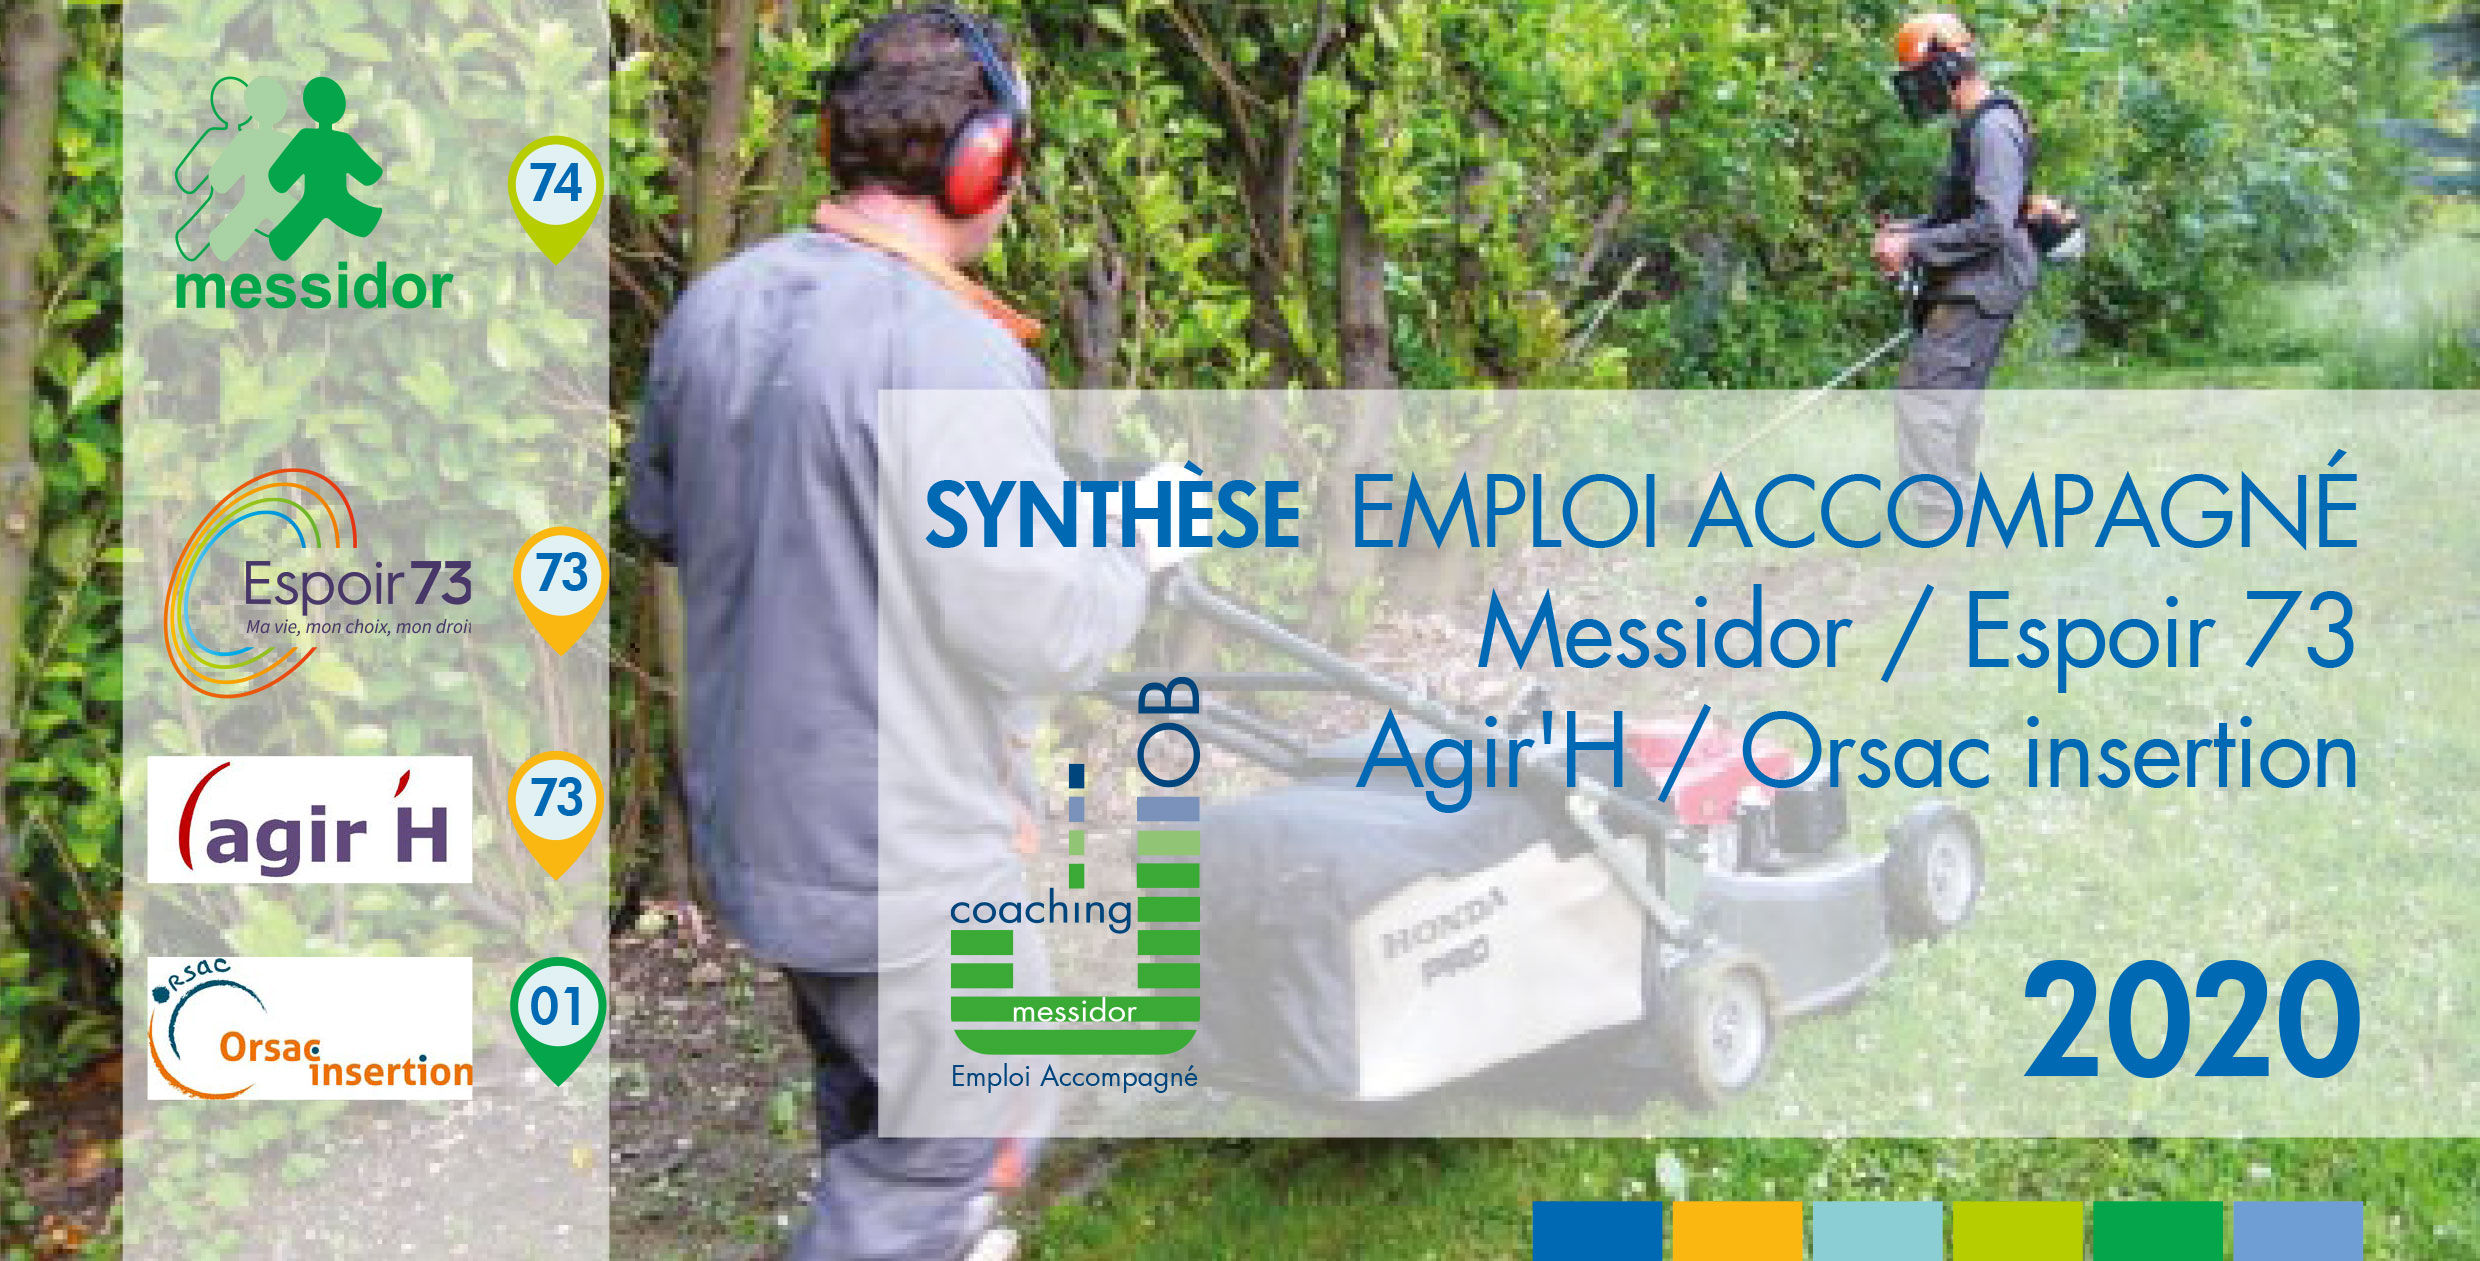 Image synthese 2020 emploi accompagne